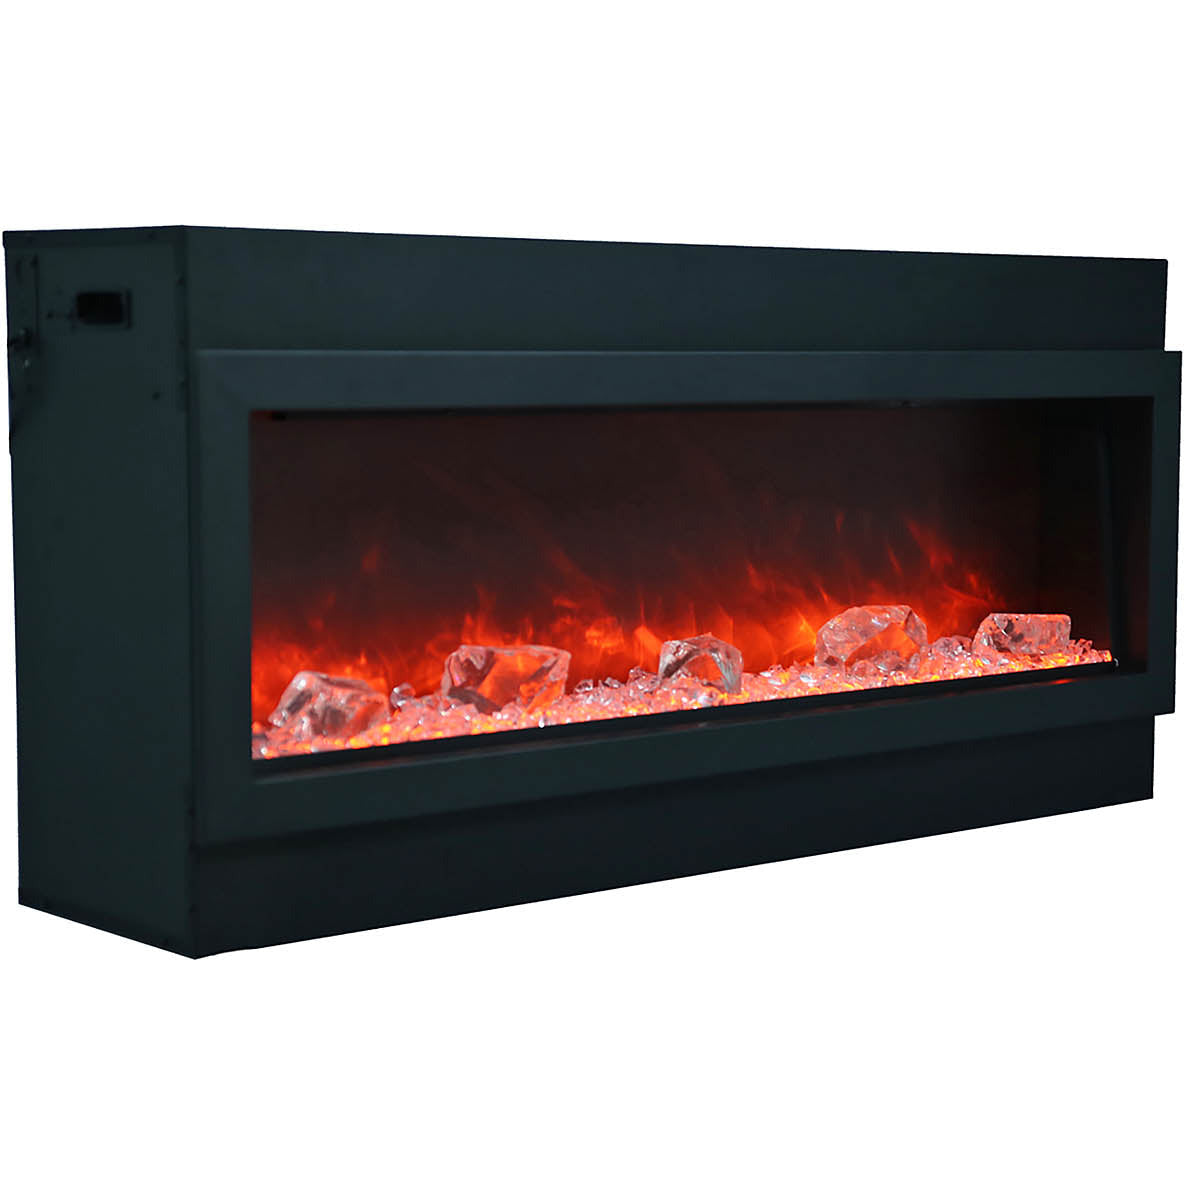 Amantii BI-88-DEEP-XT Panorama Deep & Xtra Tall Full View Smart Electric  - 88" Indoor /Outdoor WiFi Enabled  Fireplace, featuring a MultiFunction Remote, Multi Speed Flame Motor, Glass Media & a Black Trim